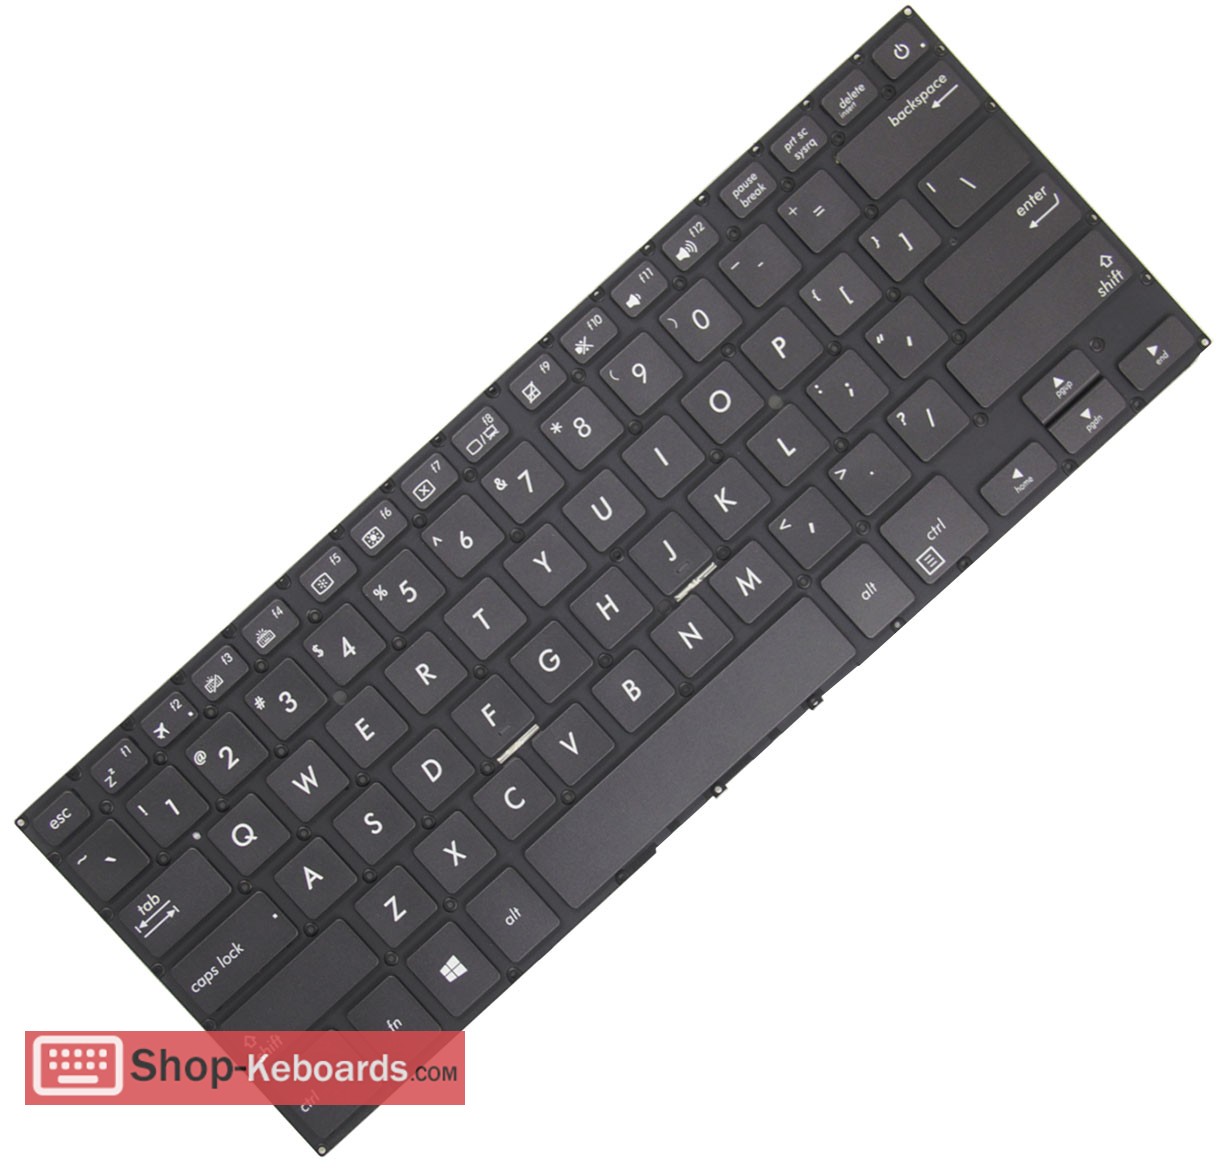 Asus p5440fa-xs54-XS54  Keyboard replacement